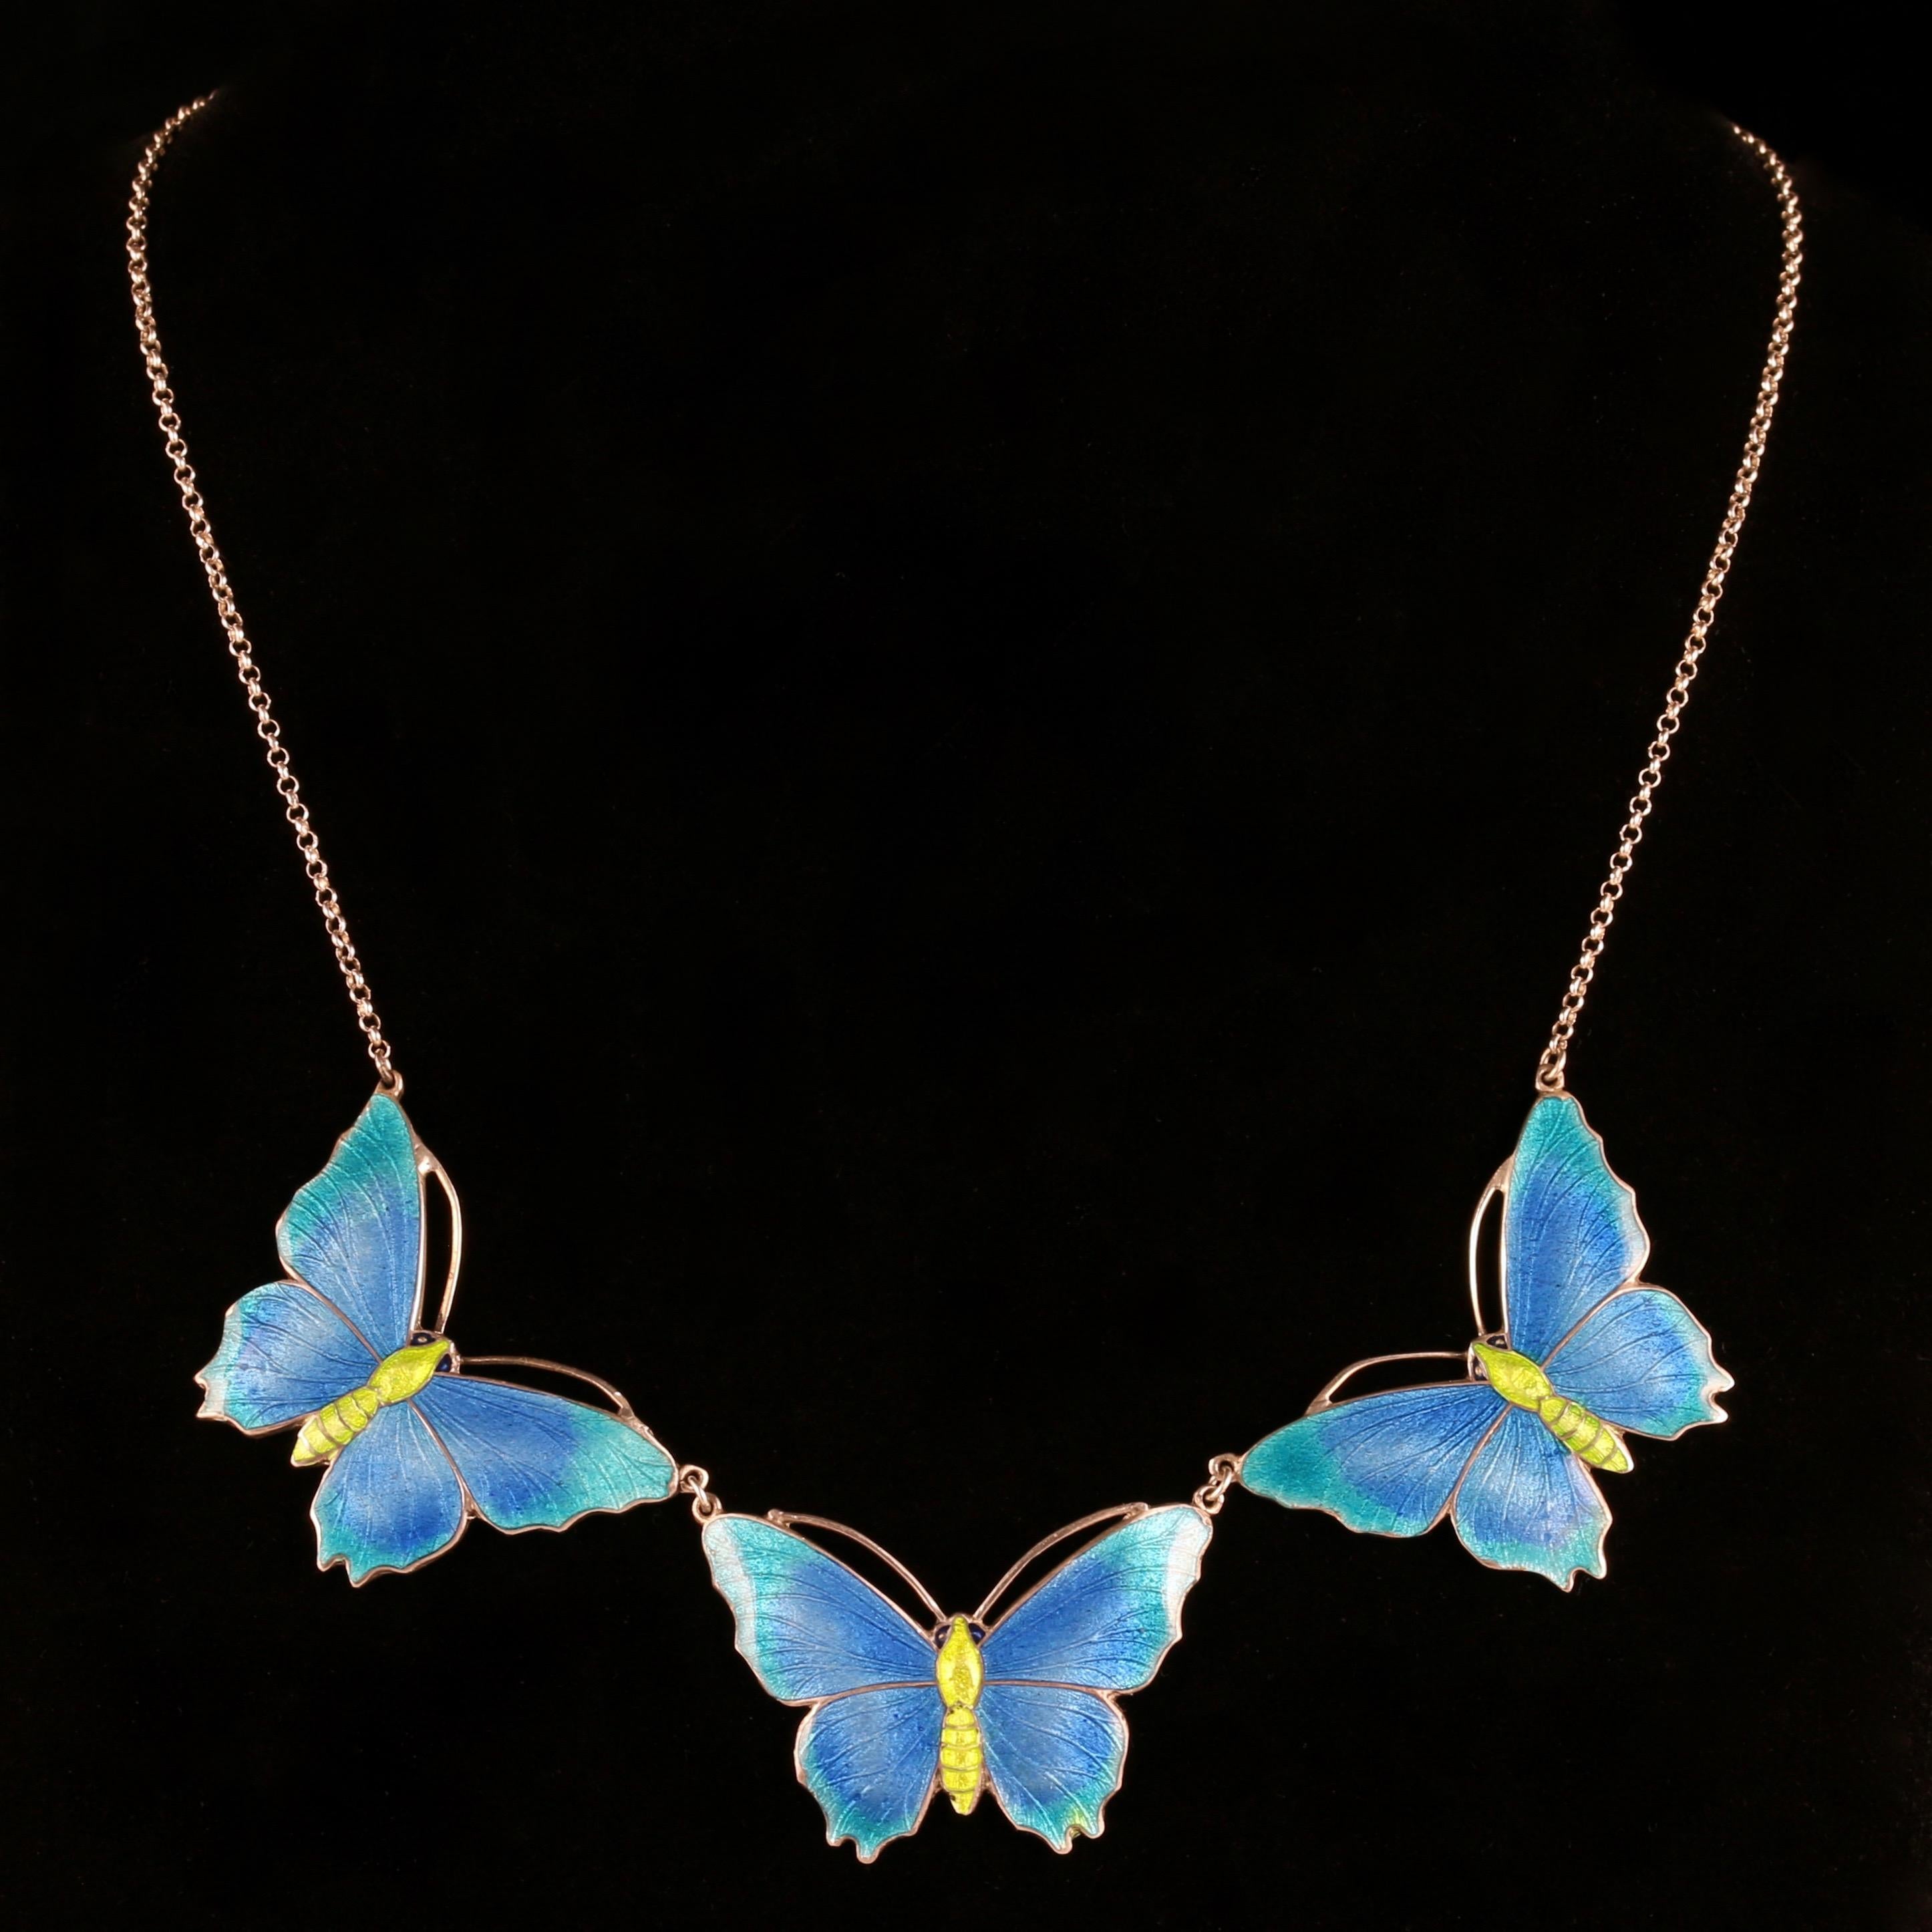 For more details please click continue reading down below...

This stunning Silver necklace is adorned with 3 beautiful enamel butterflies fluttering together. Circa 1880

Butterfly or insect jewellery is highly collectable and was a symbol of good